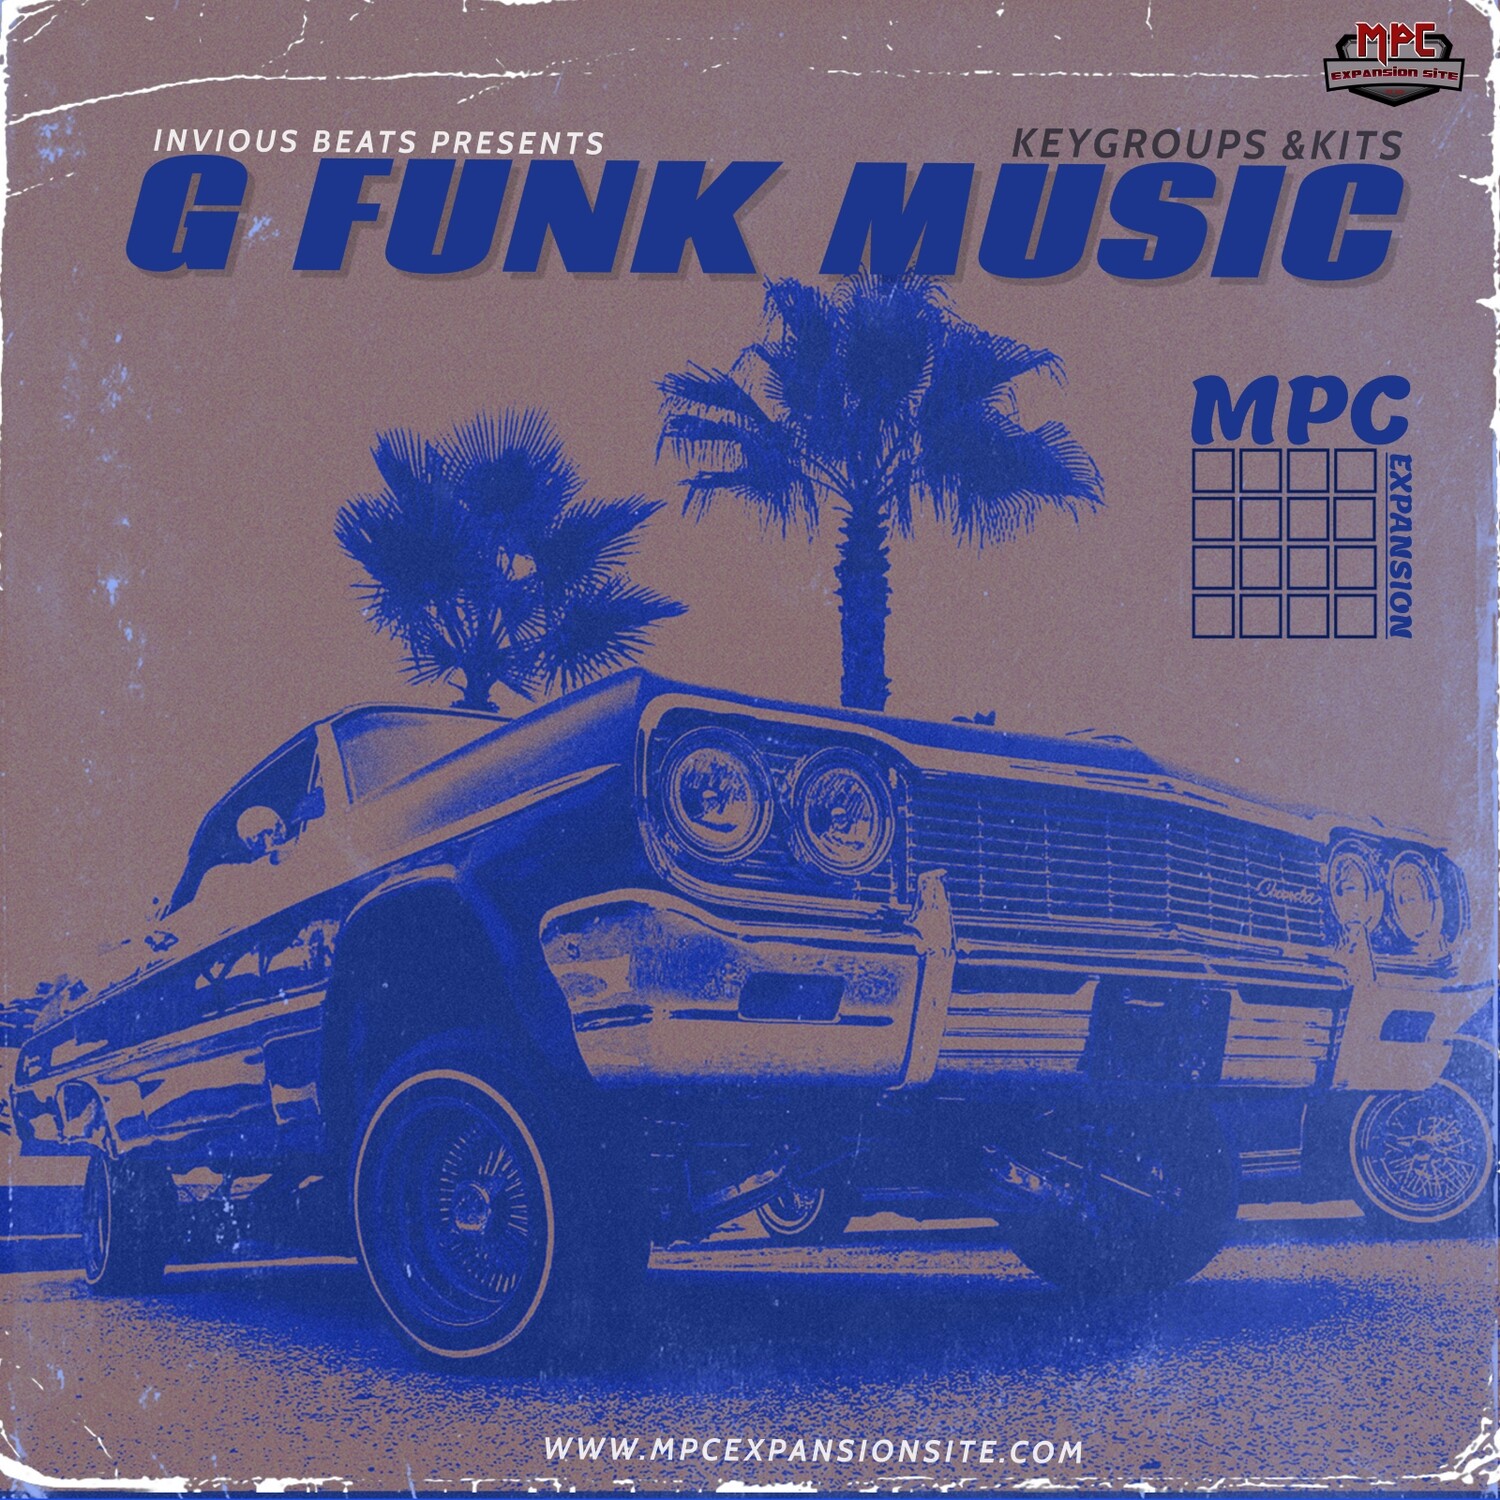 MPC EXPANSION 'G-FUNK MUSIC' by INVIOUS